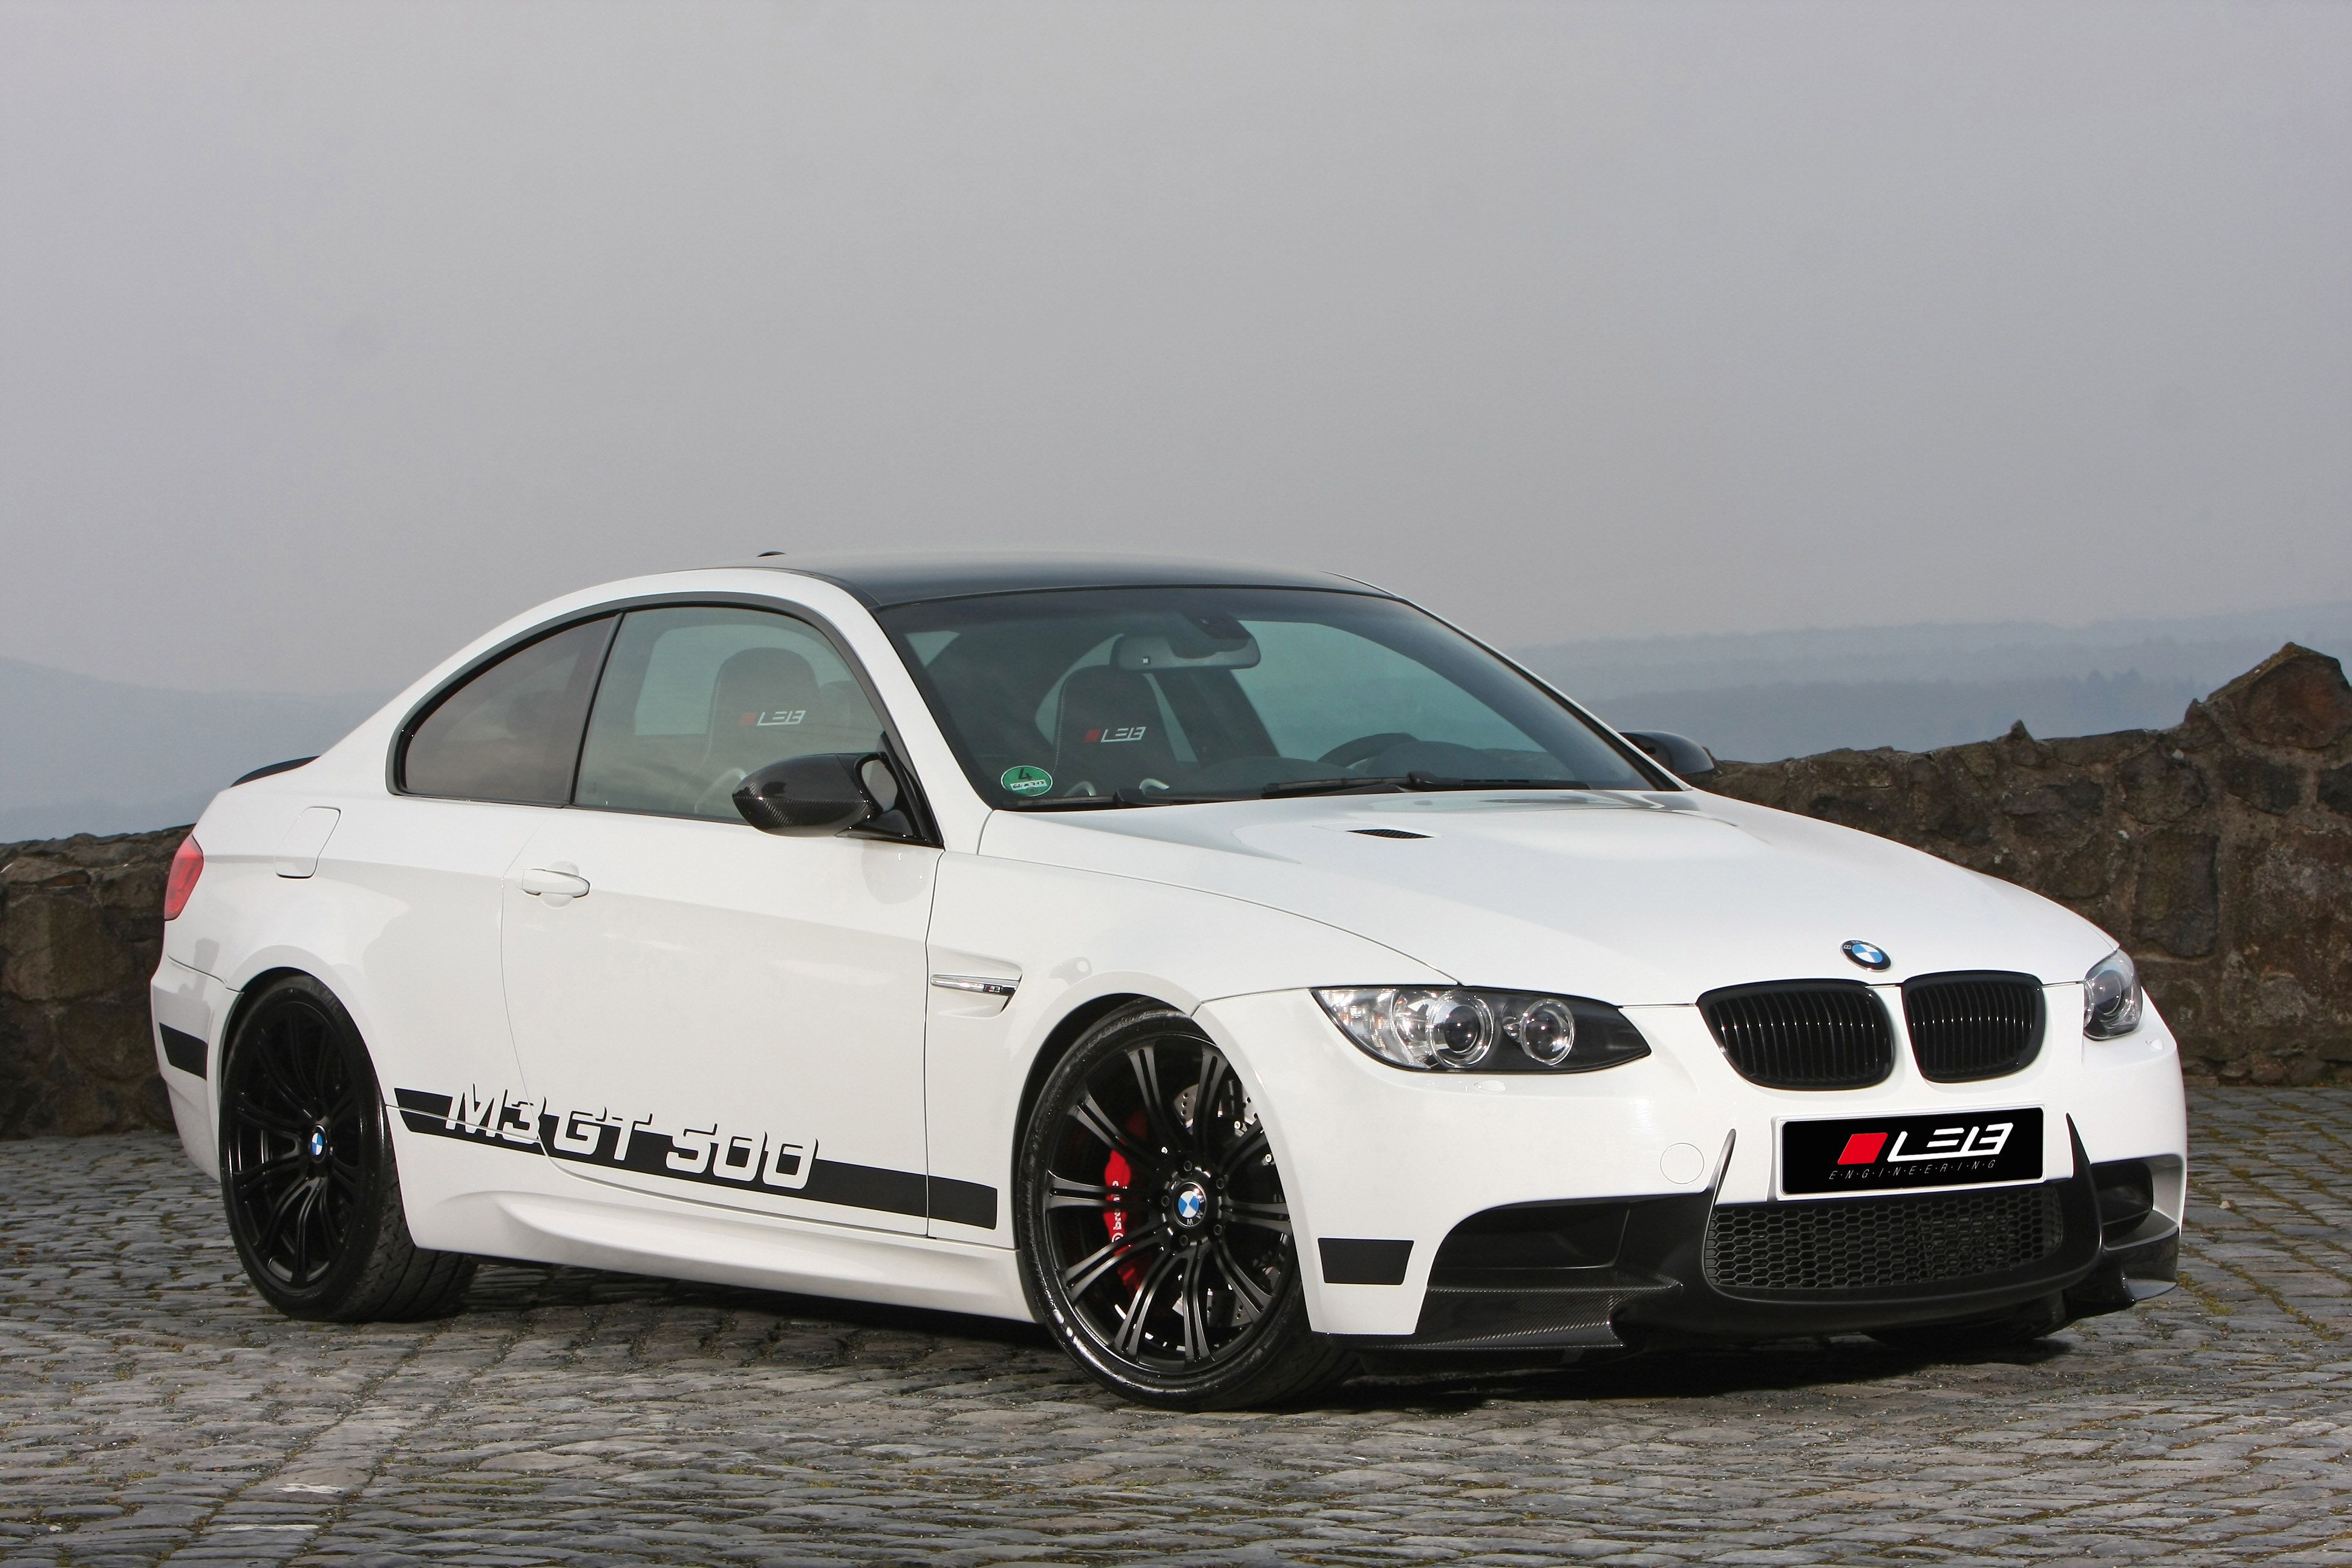 2013 BMW M3 GT 500 by Leib Engineering